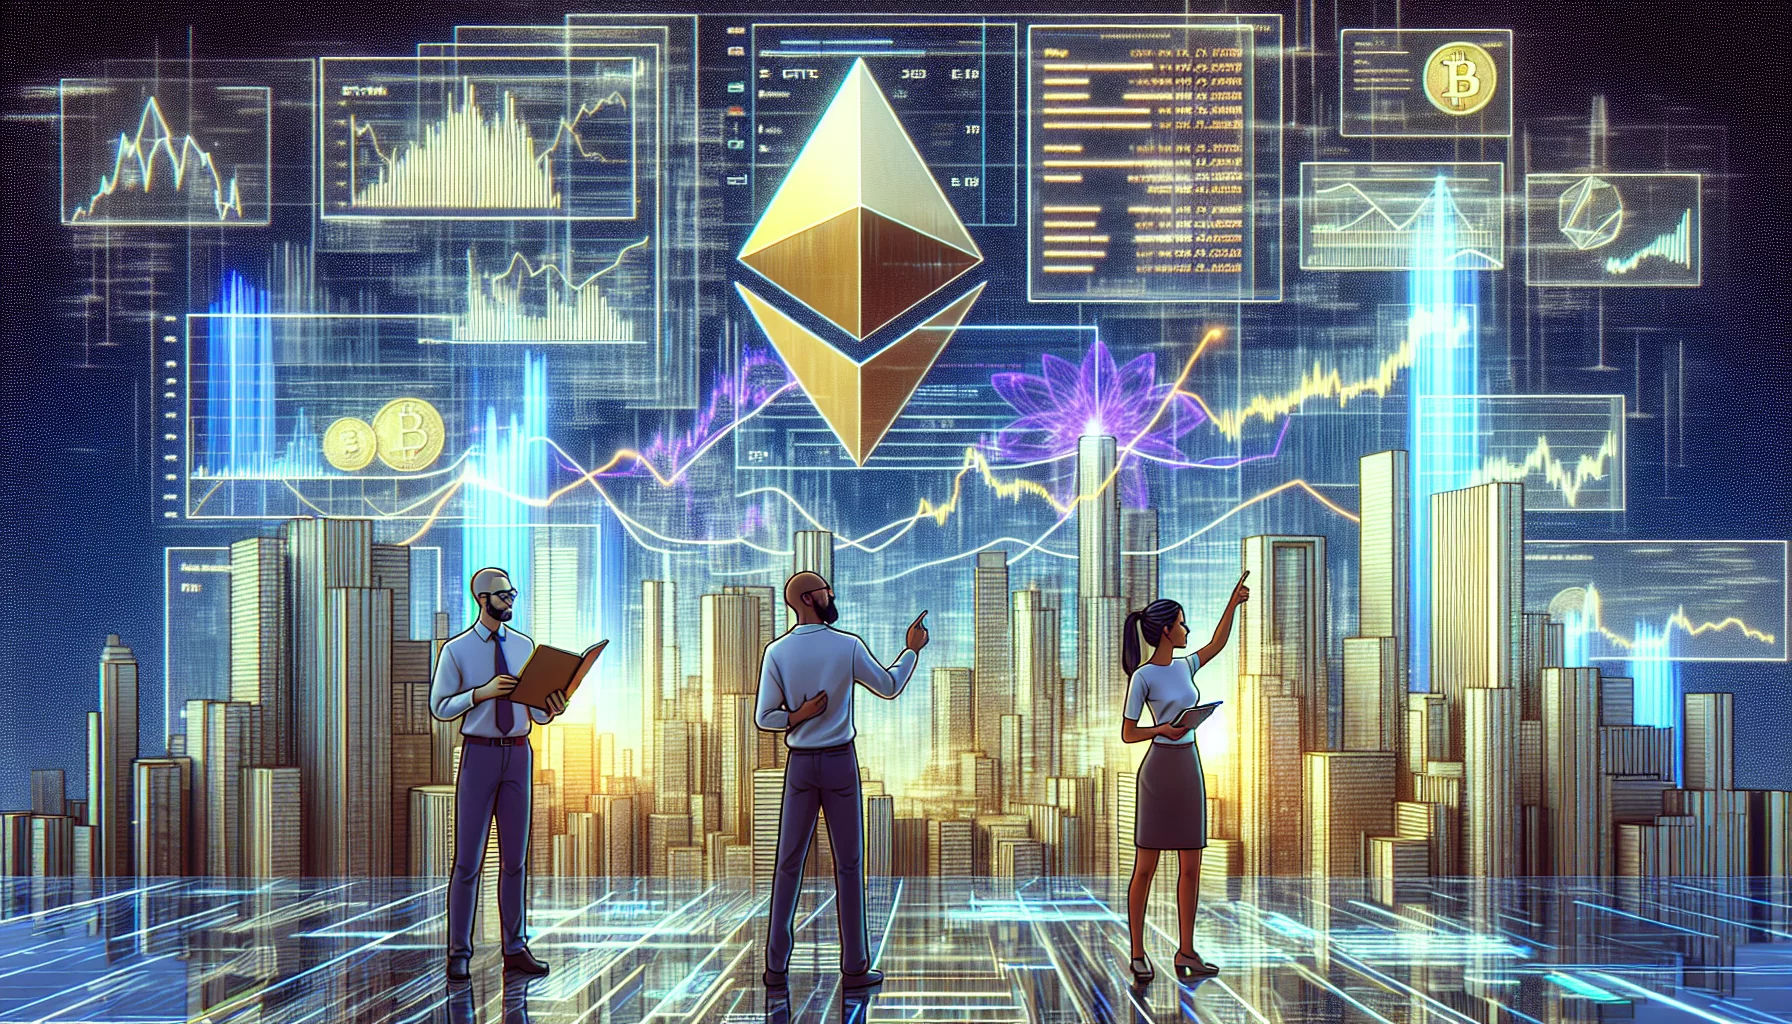 Analyzing ethereum's future market: trends, insights and key influencers